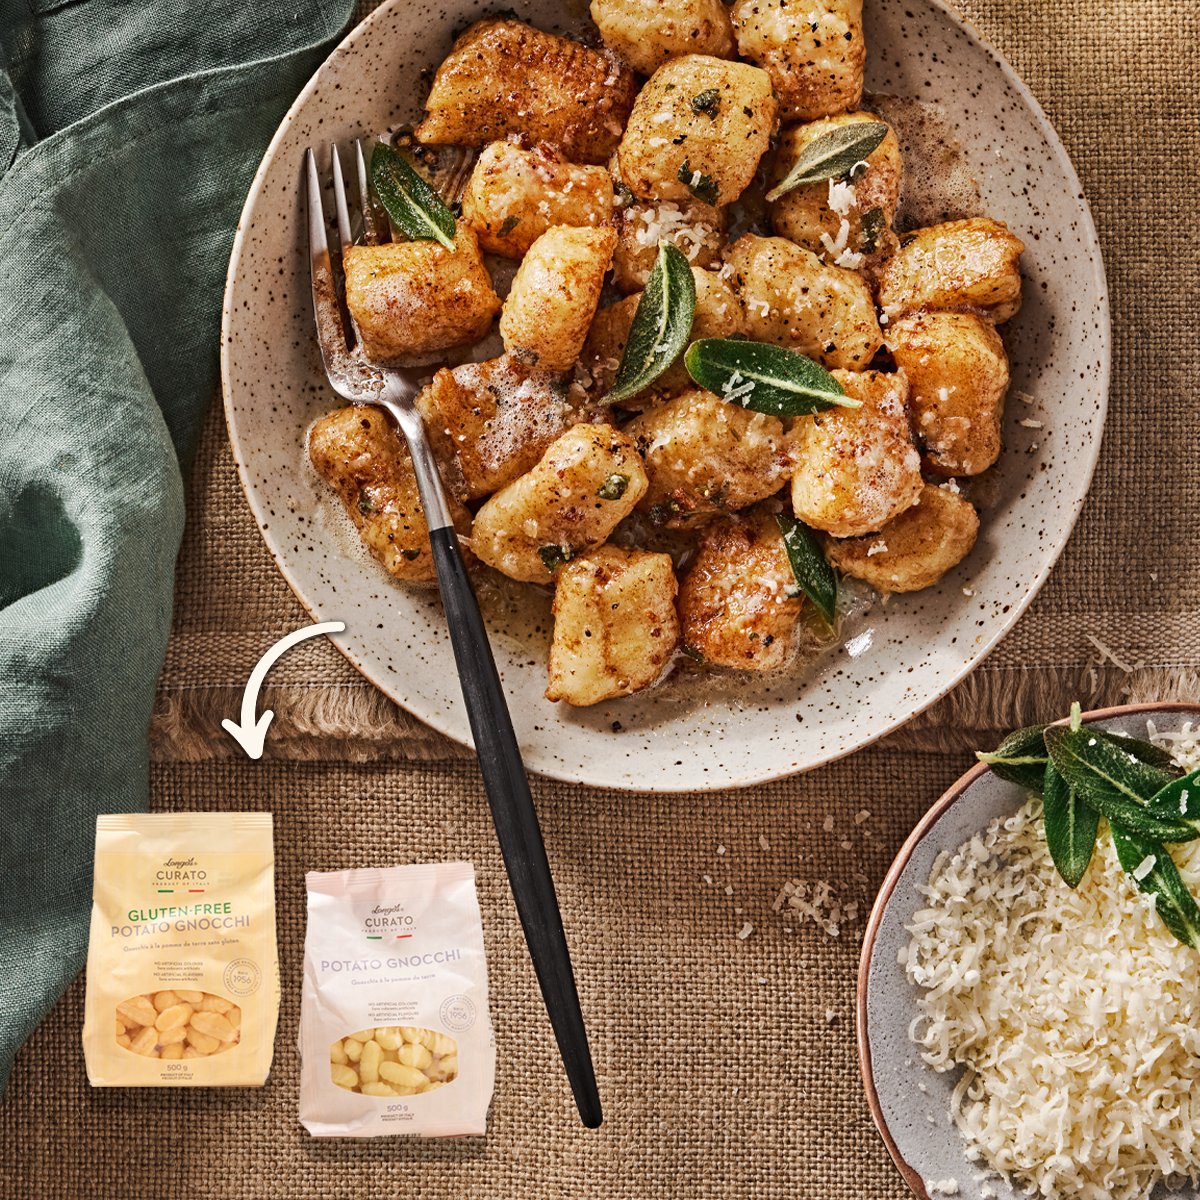 You say potato, we say gnocchi! In our family, we honour tradition with this beloved recipe featuring simple, quality ingredients — and you can too! Get the full recipe here: longos.com/Recipes/Learn-…